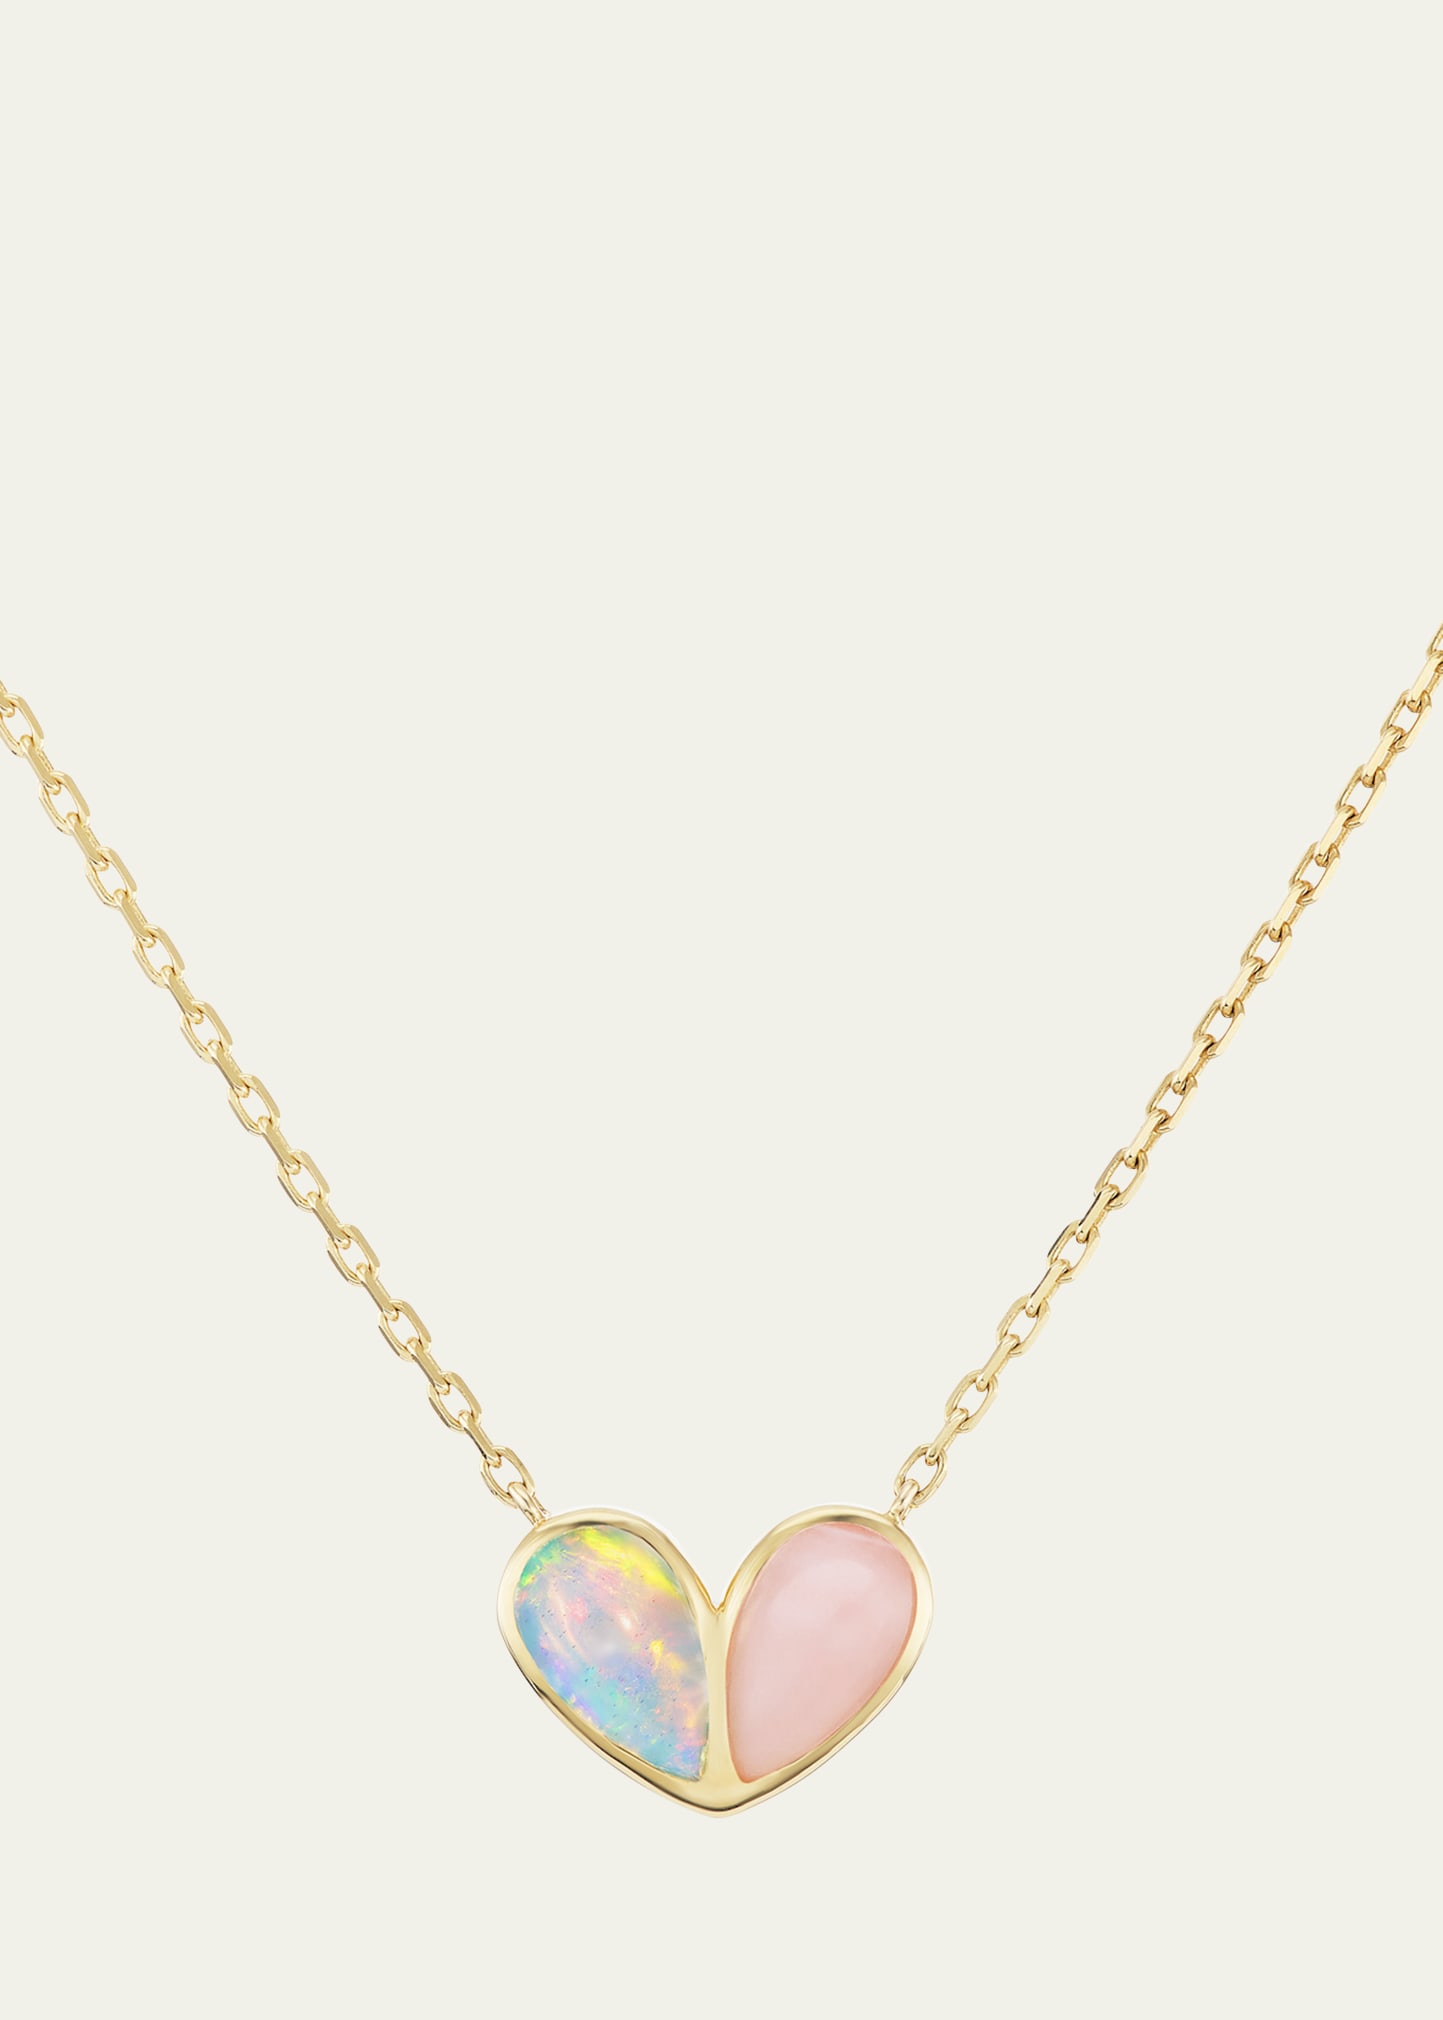 18K Yellow Gold Sweetheart Ethiopian and Pink Opal Necklace